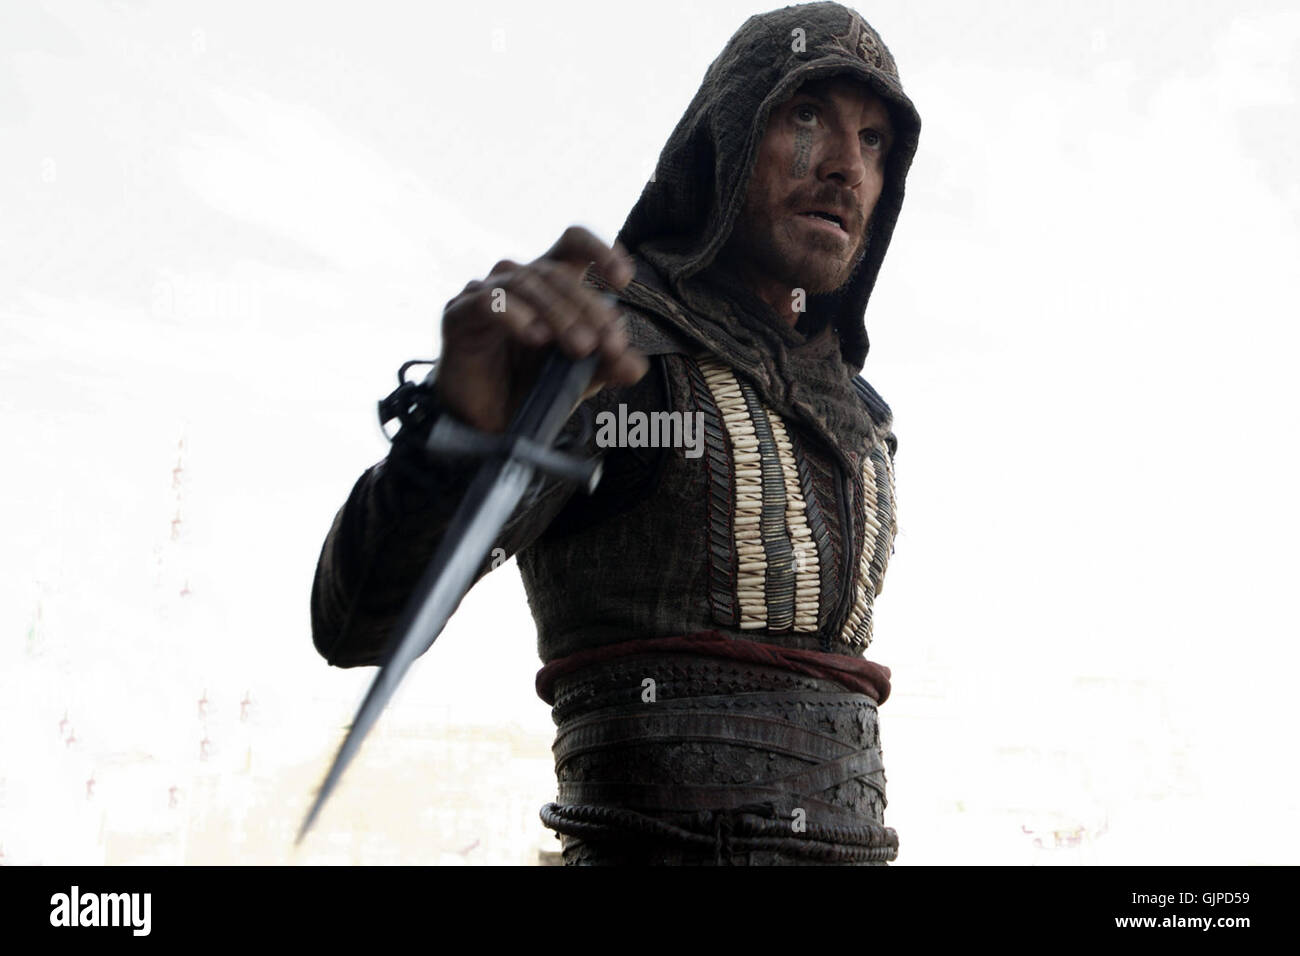 Assassin's Creed 2016 Movie and Game News: Set Photos & Screenshots! Headed  to India & Russia! 